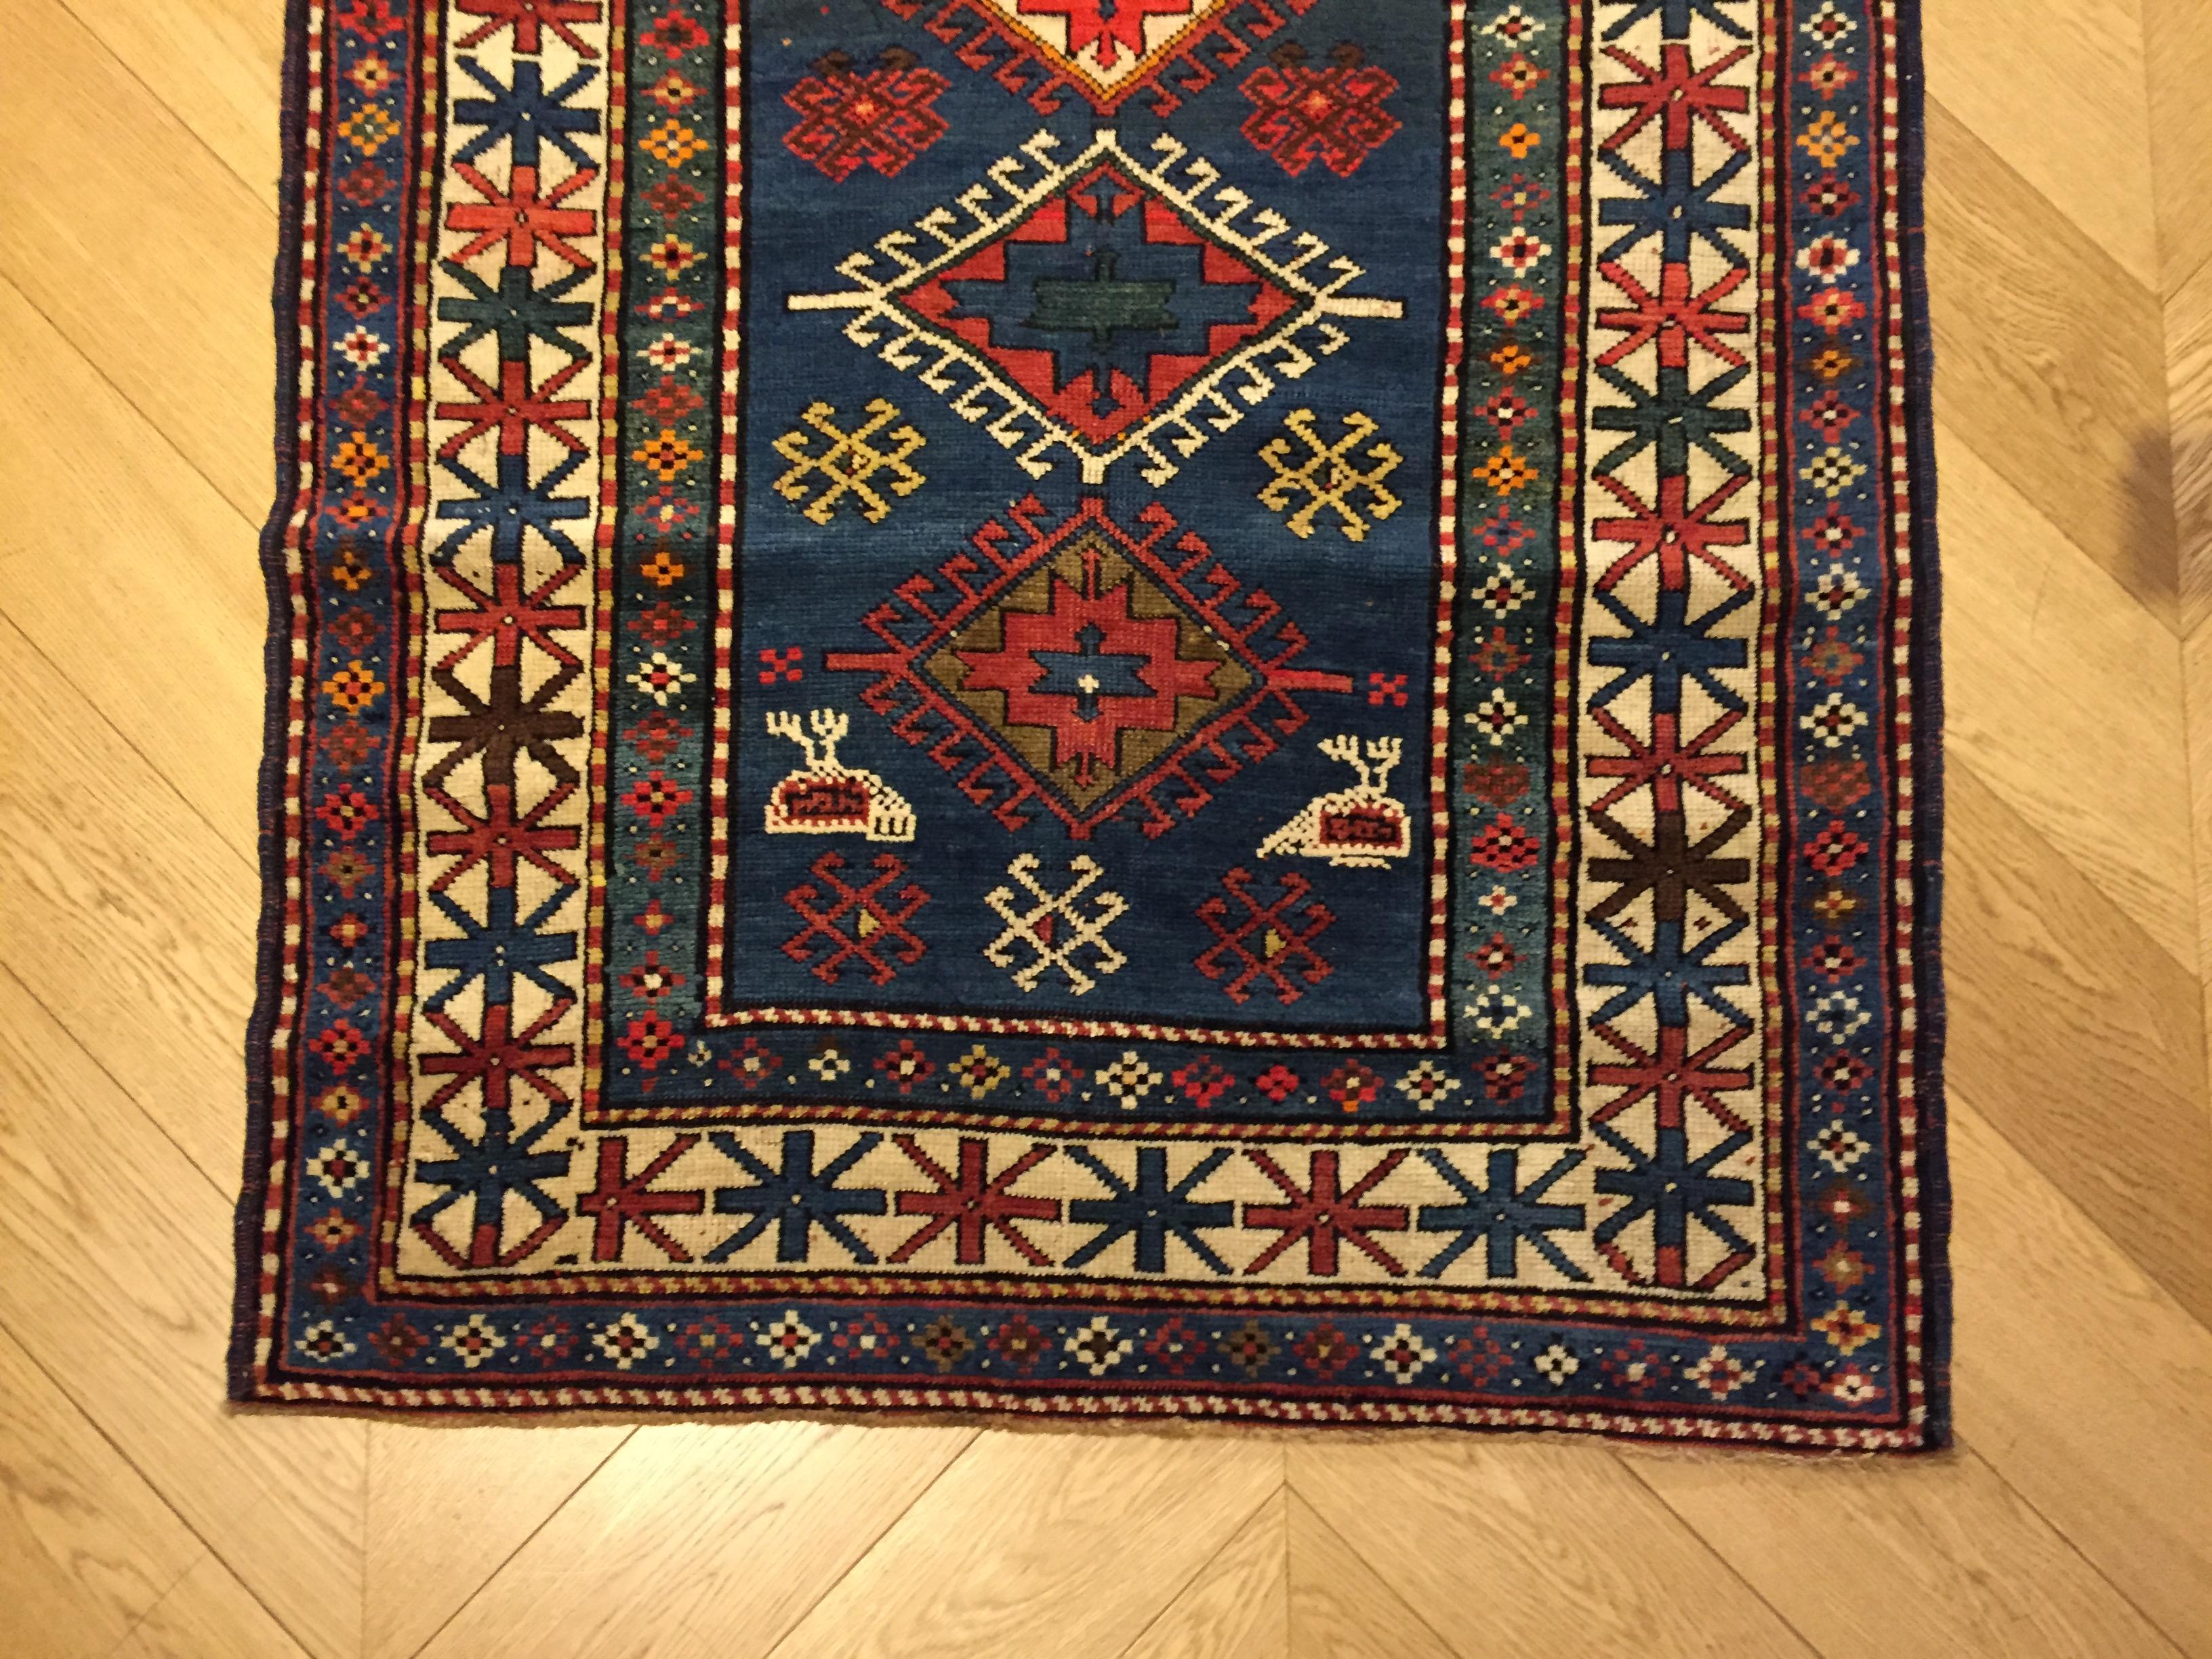 20th Century Blue Field Geometric with Rhombus in Wool Nomad Kazakh, Early 1900 For Sale 1